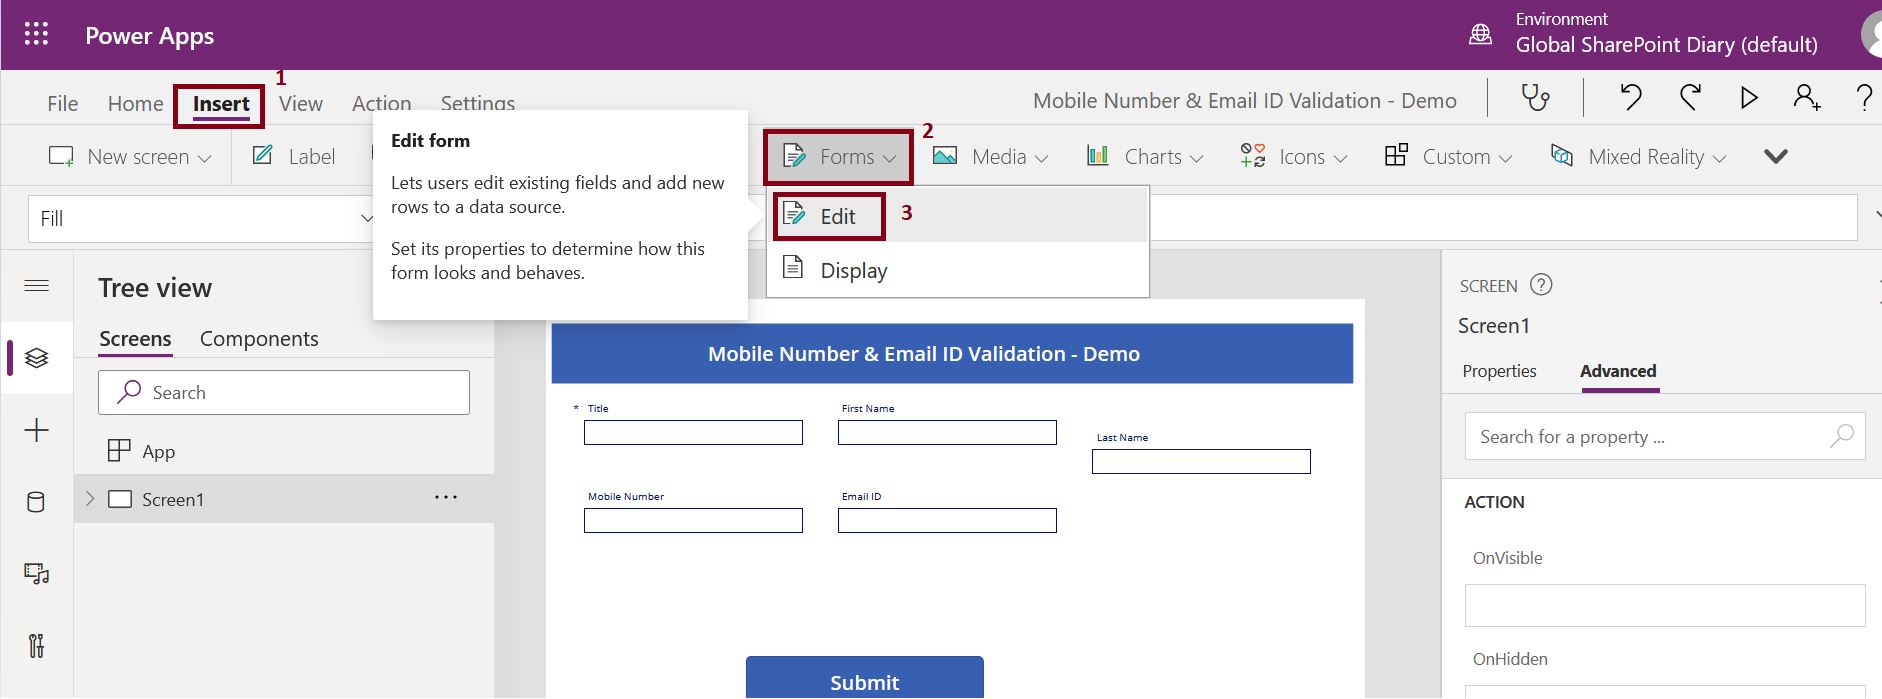 PowerApps SharePoint connection - add form control in PowerApps Canvas App